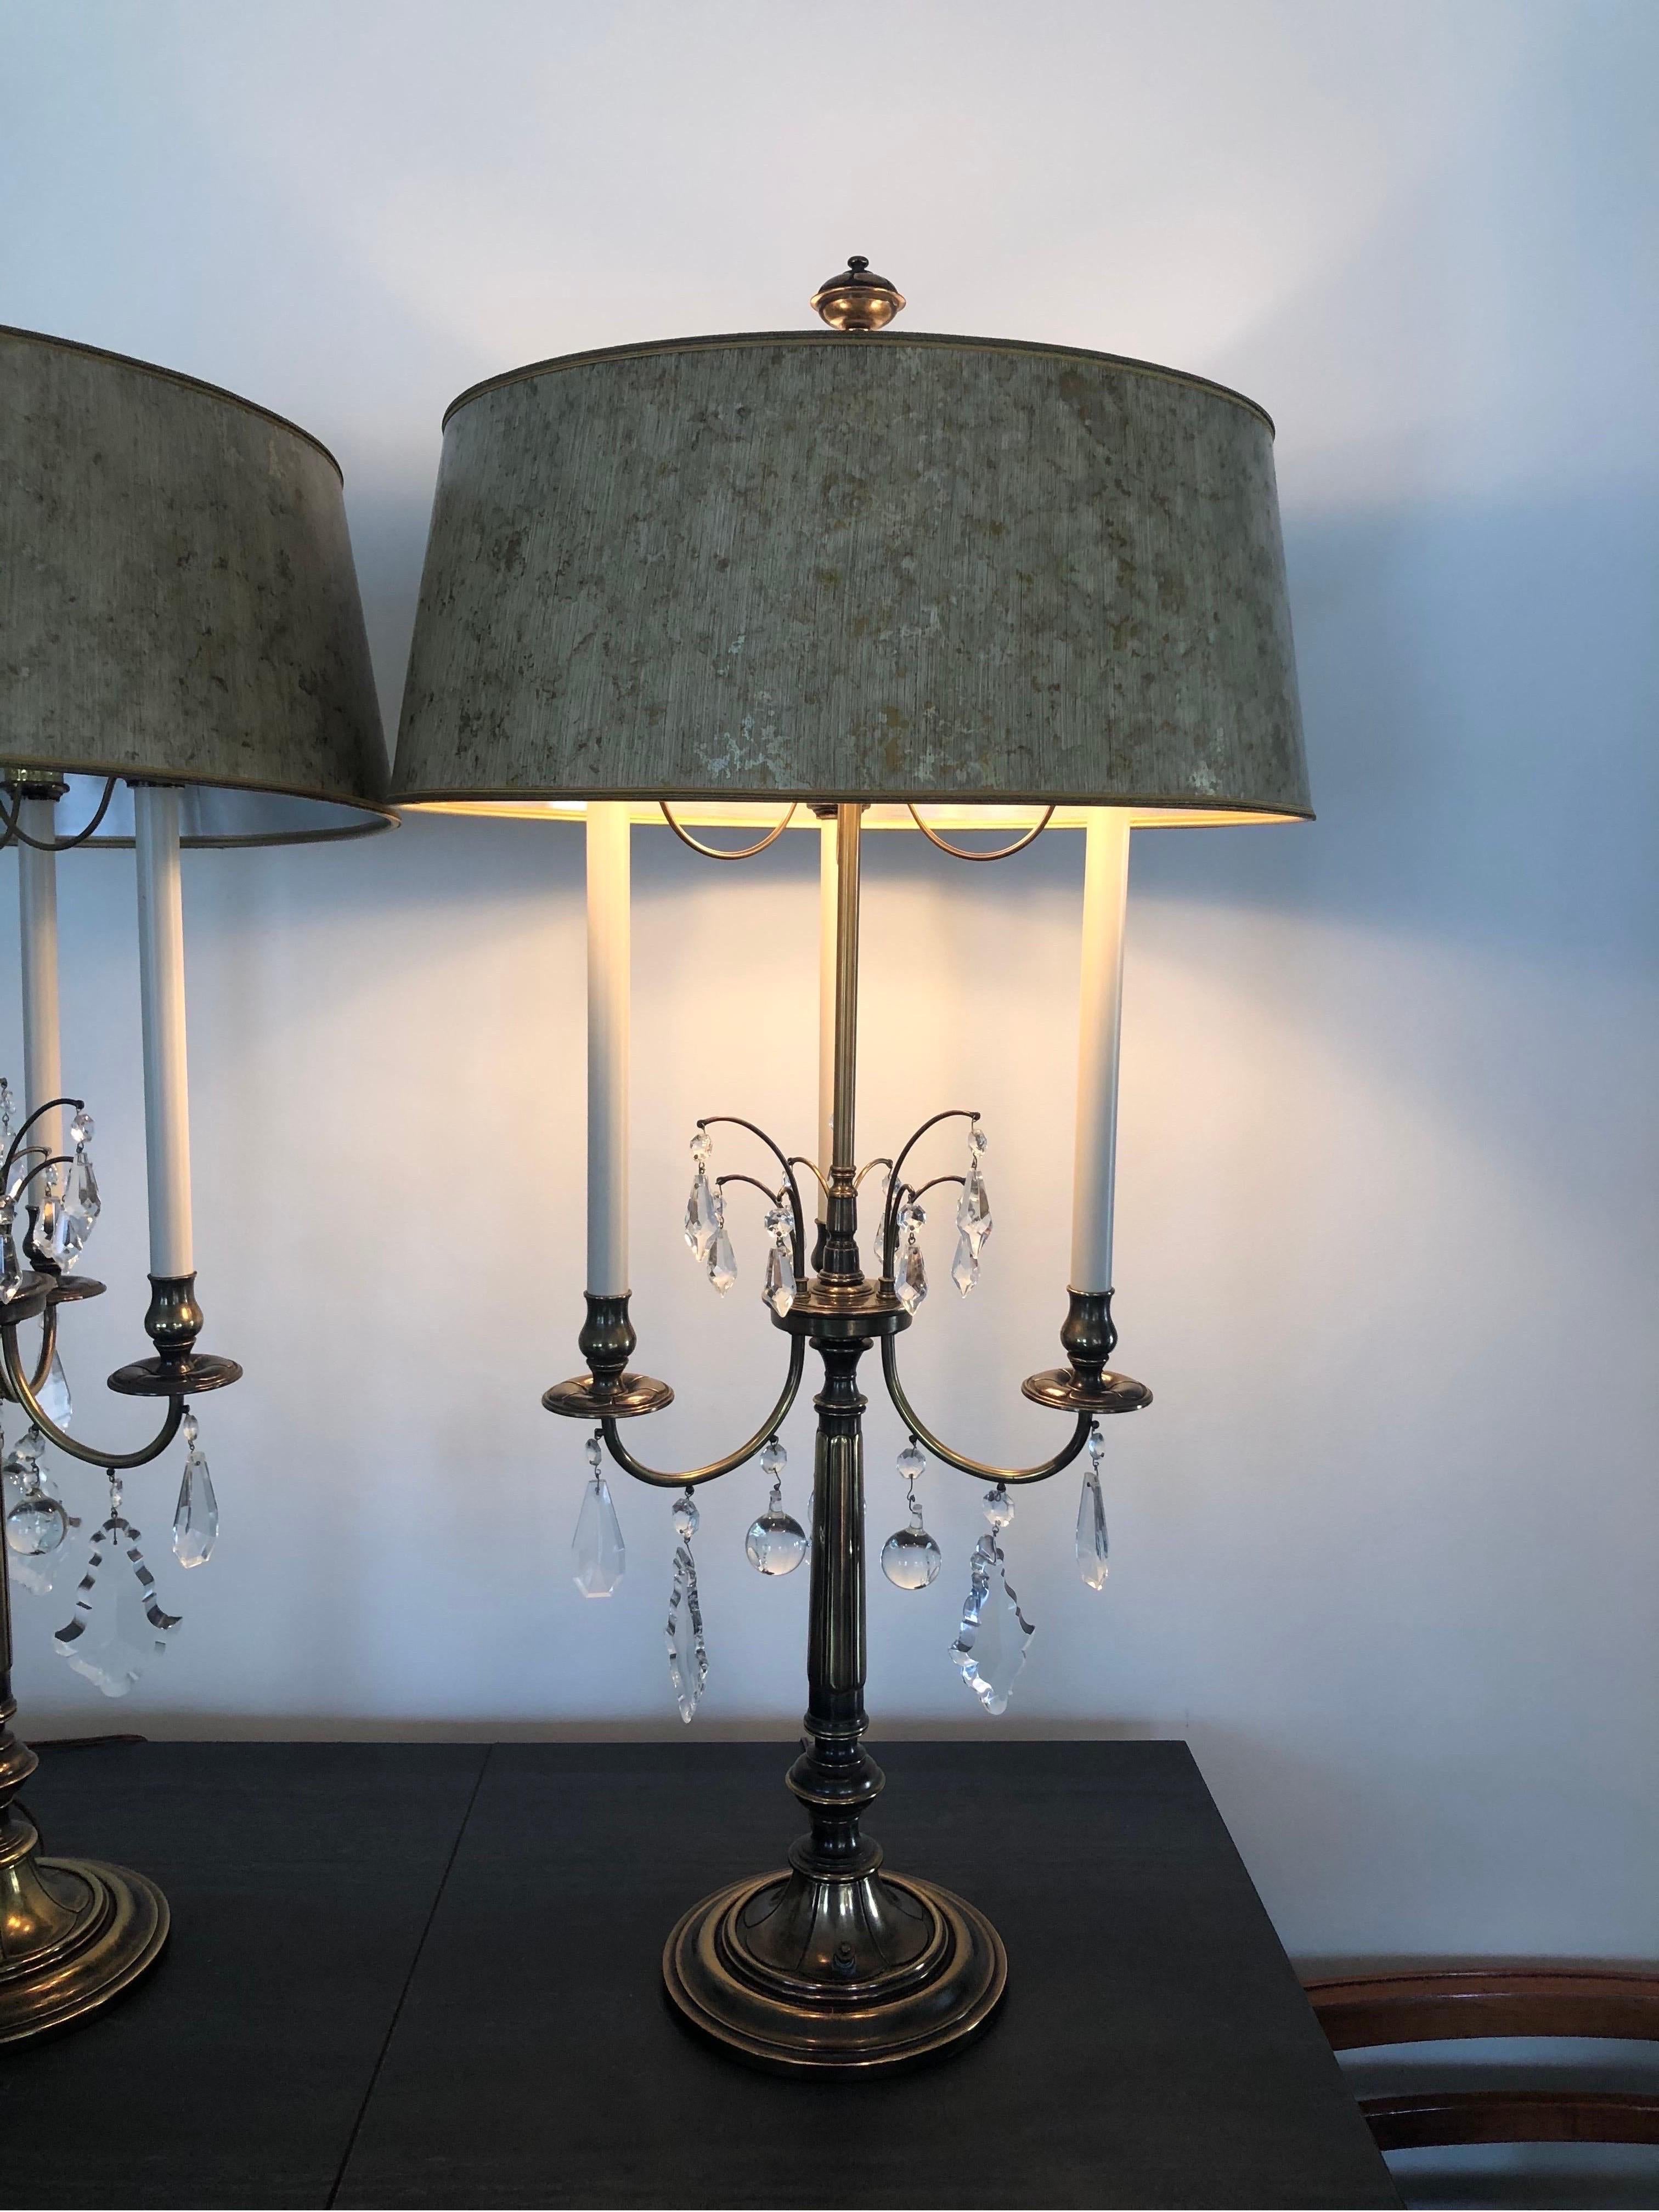 In excellent original condition, these sizable three-arm lamps are made of brass, with hanging crystals. With original cream and gold tortoiseshell shades, and stately finials.
Can deliver curbside up to 30 miles from zip code 07711. $3000.